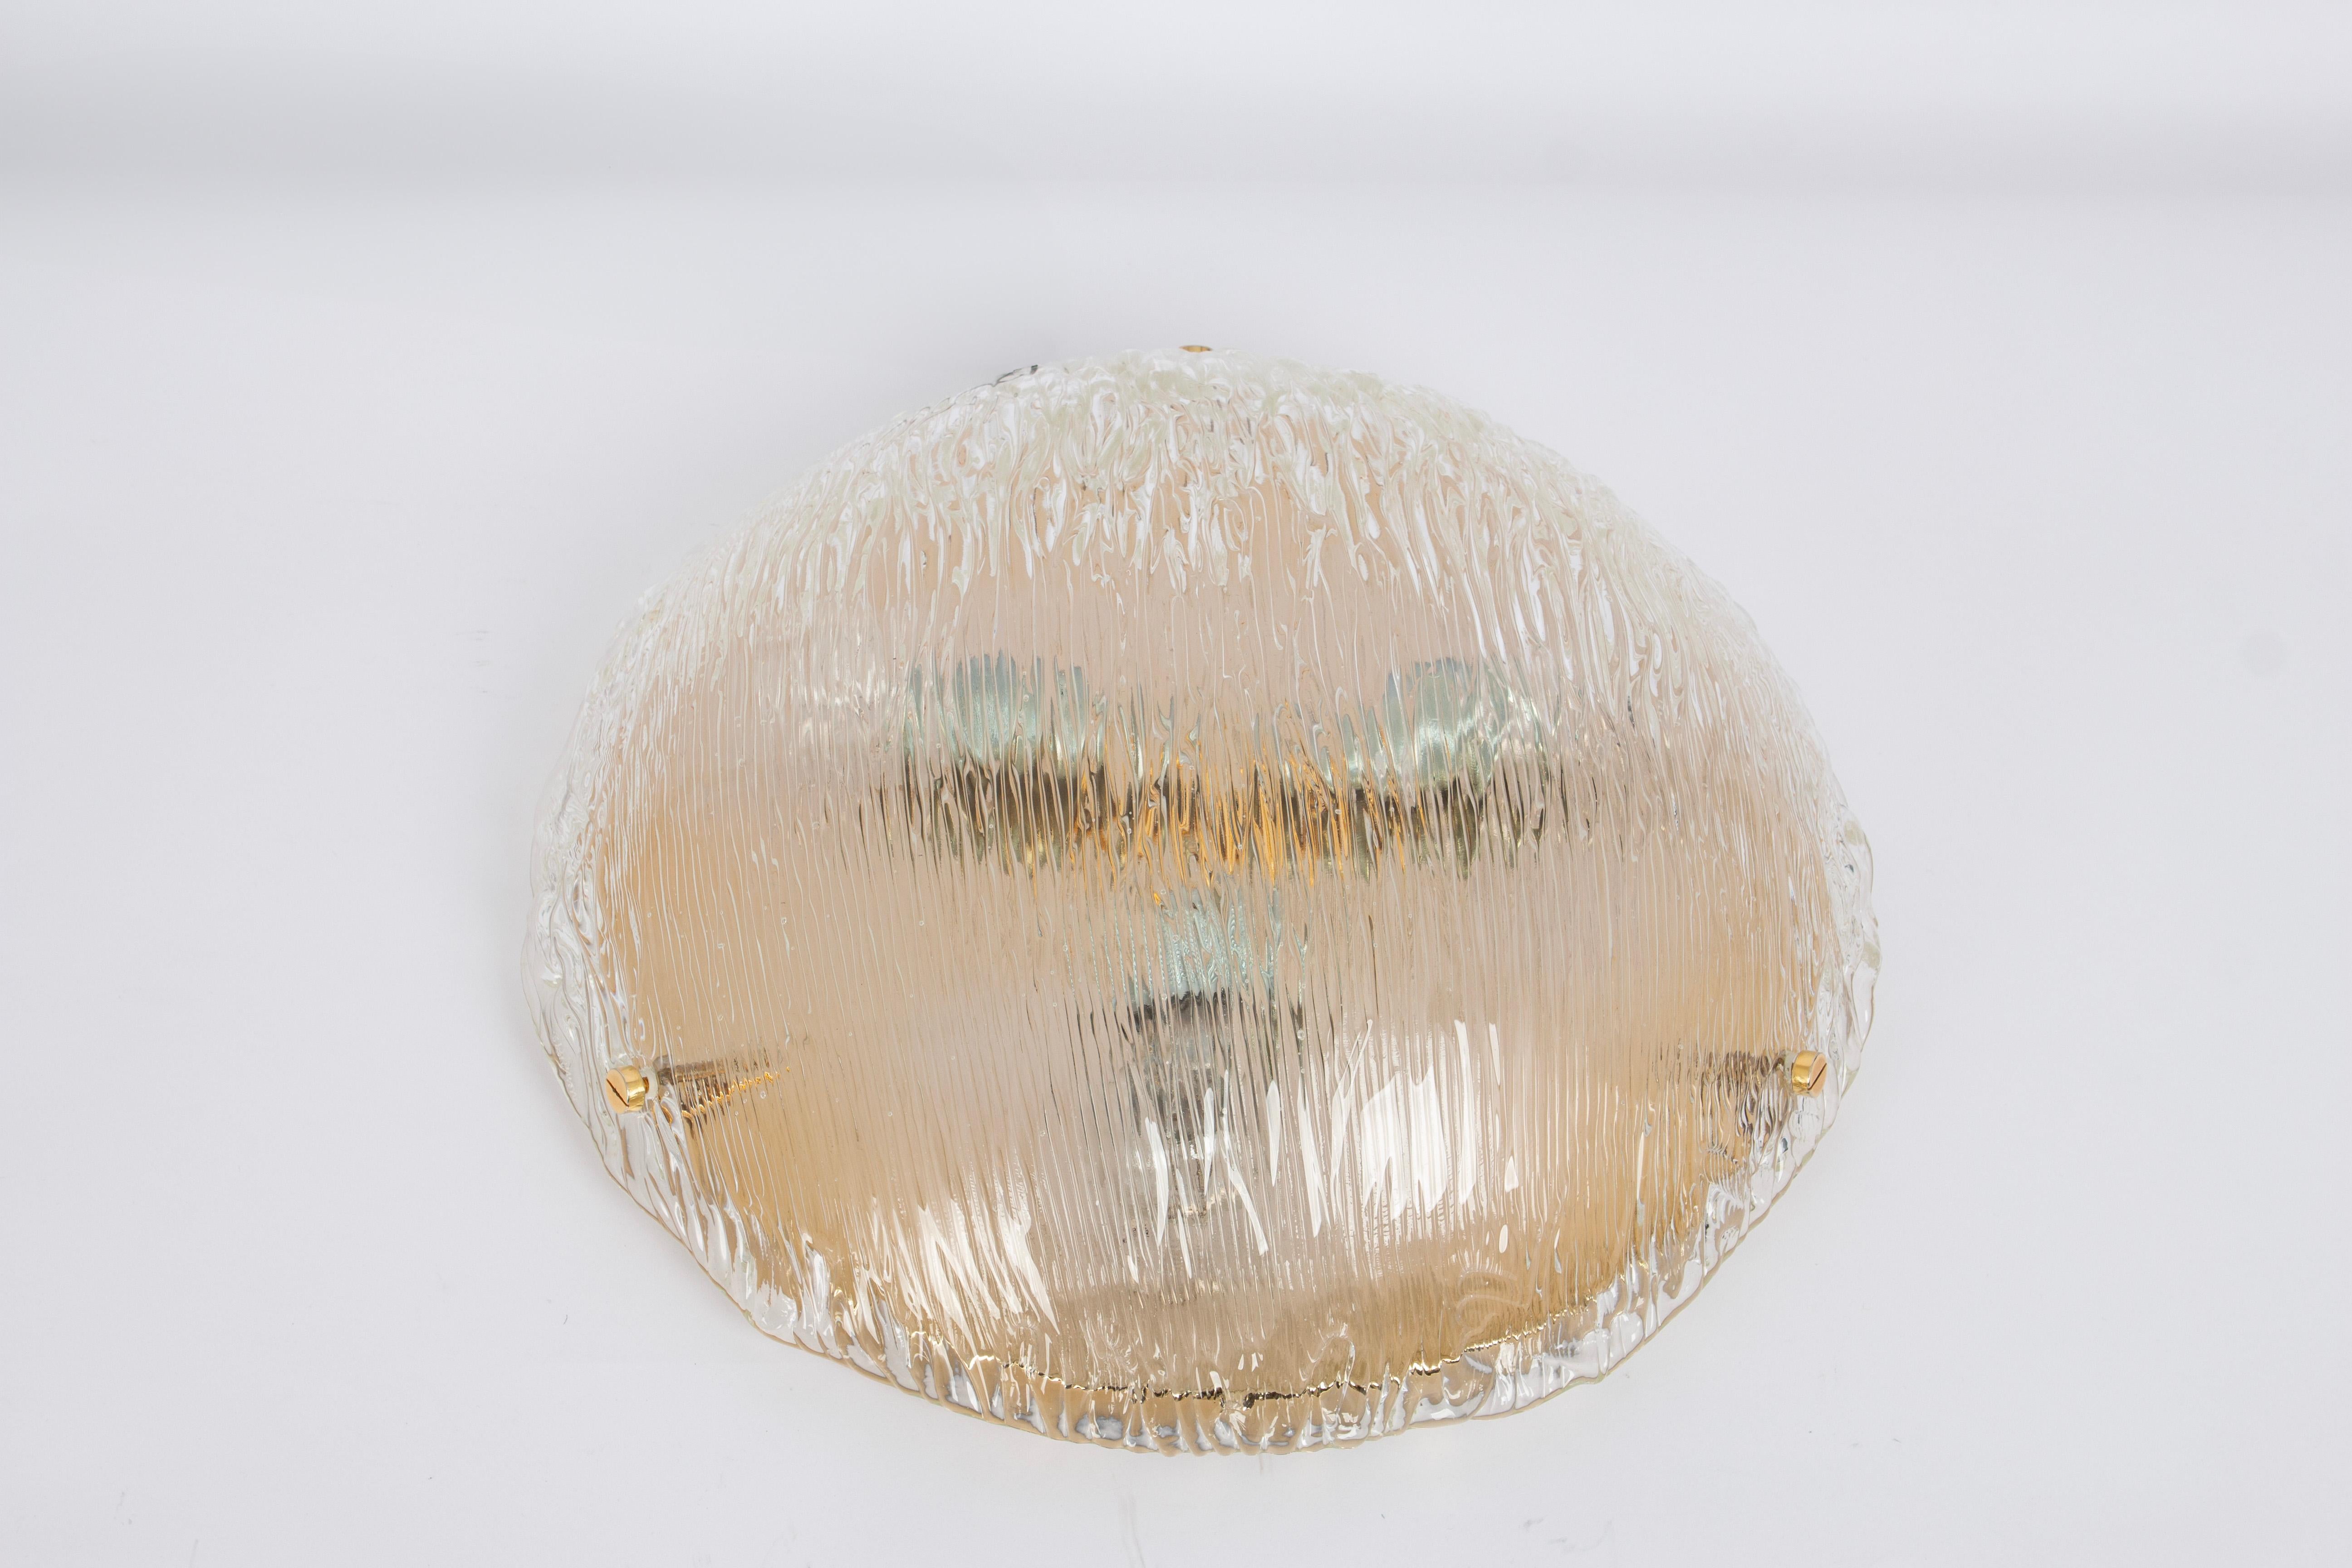 Large Venini ceiling lights attributed to Carlo Scarpa for Venini, 1960s.
Wonderful light effect.
The heavily textured and slightly iridescent glass dome is held in place by a brass knob

High quality and in very good condition. Cleaned, well-wired